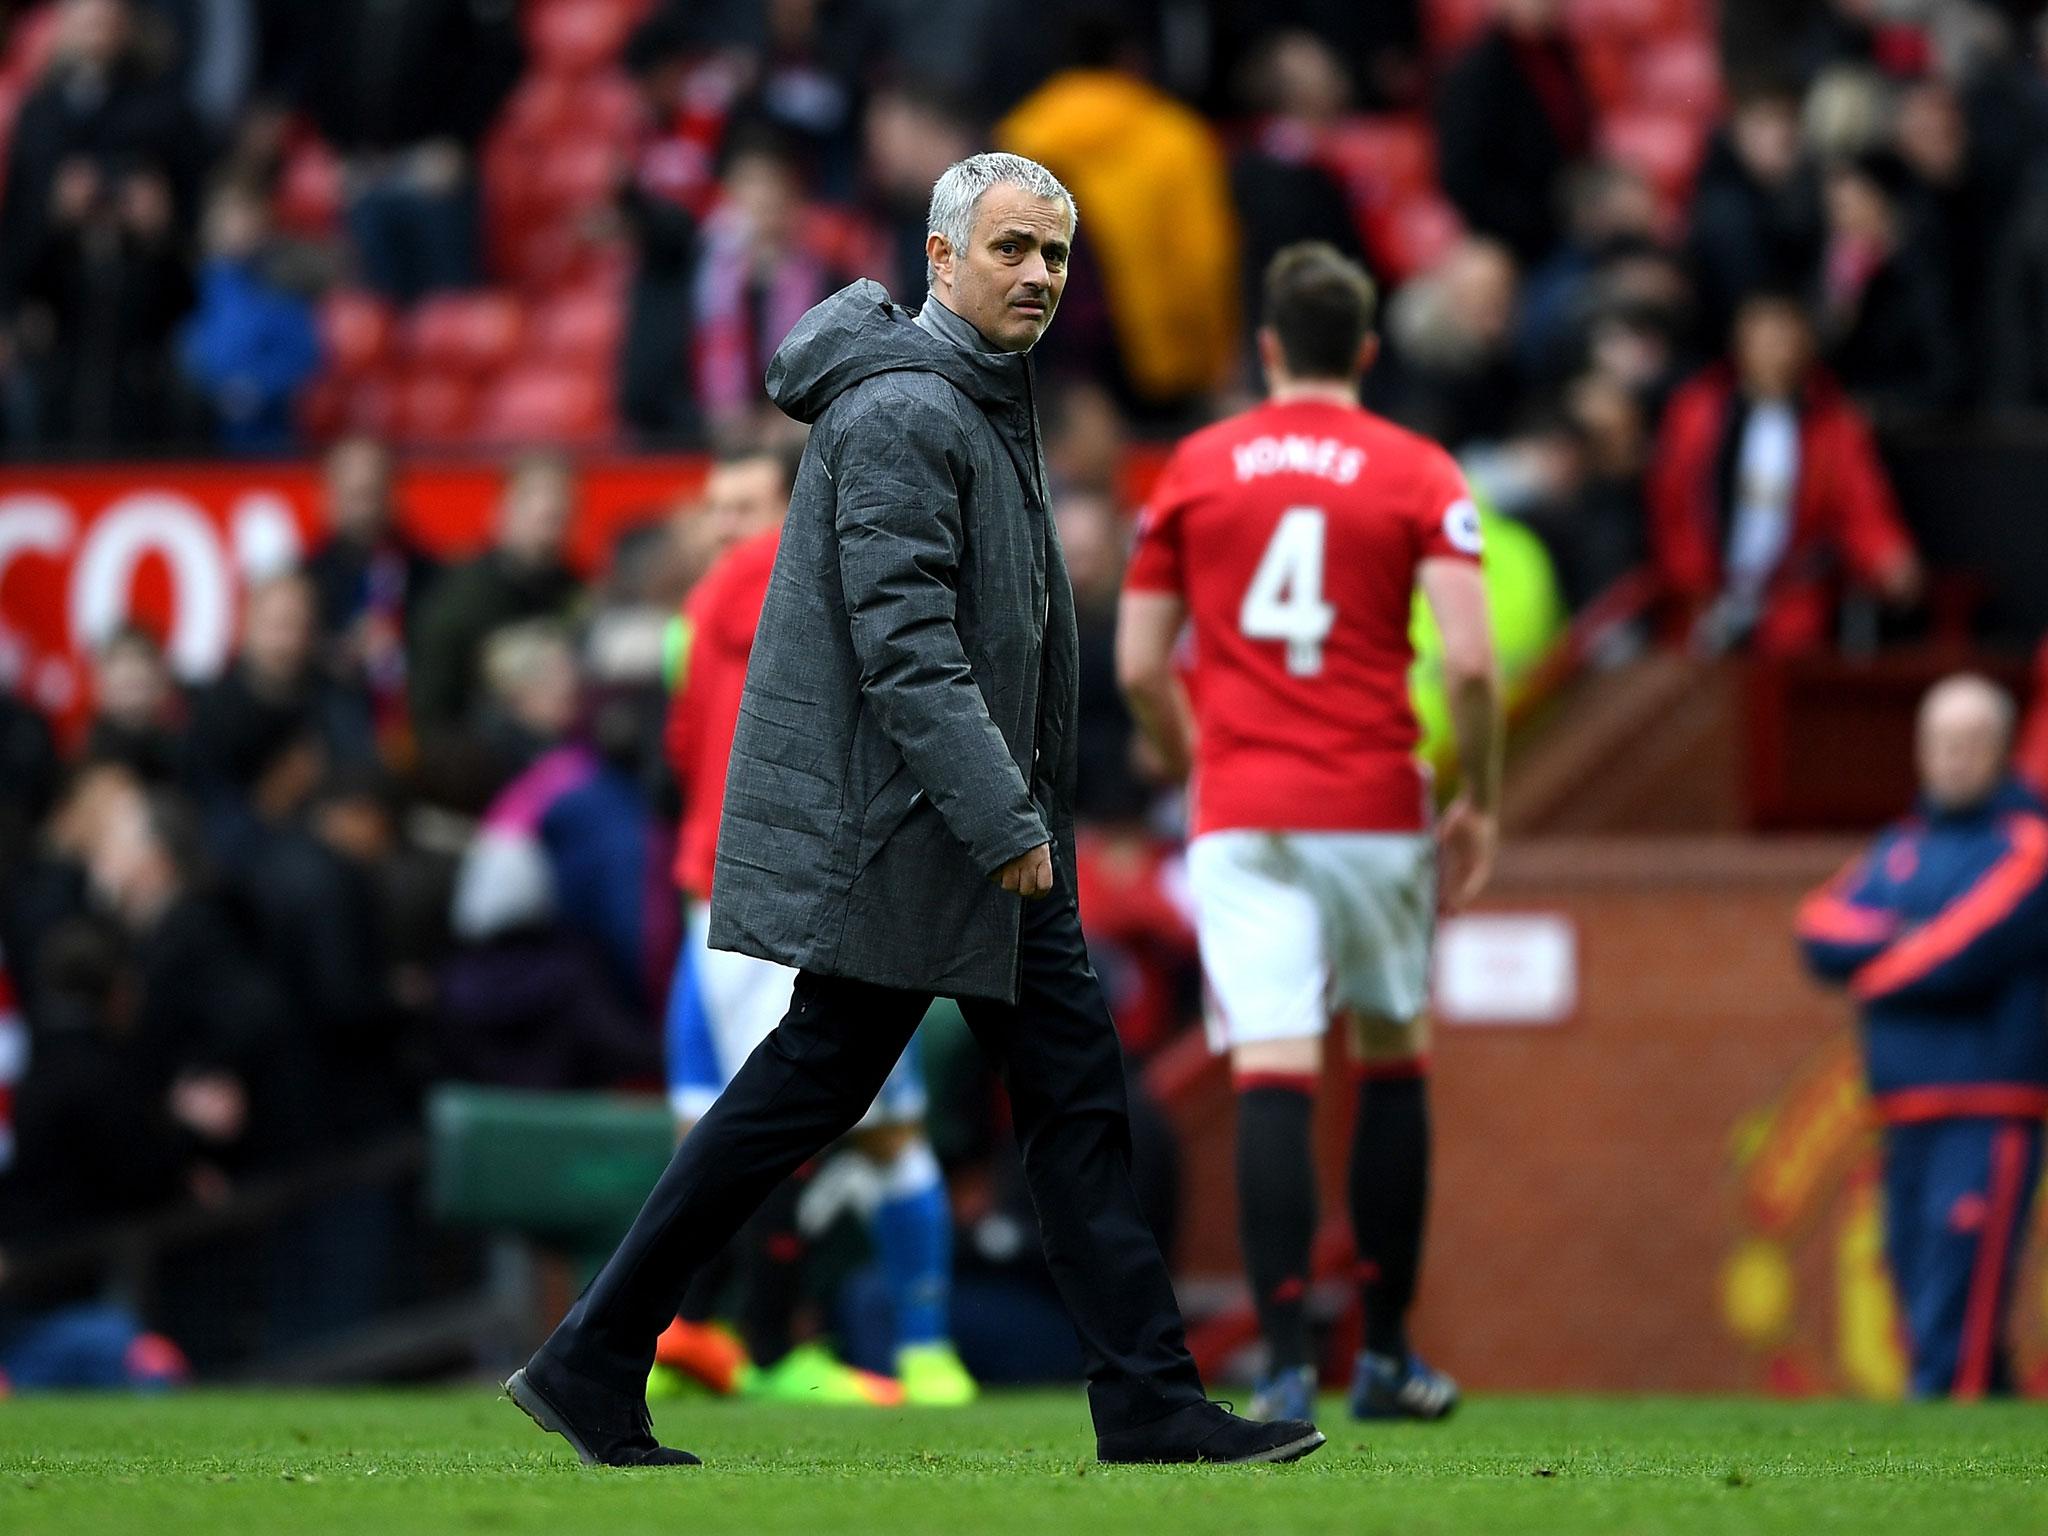 Jose Mourinho knows he must remedy his side's weak form at home